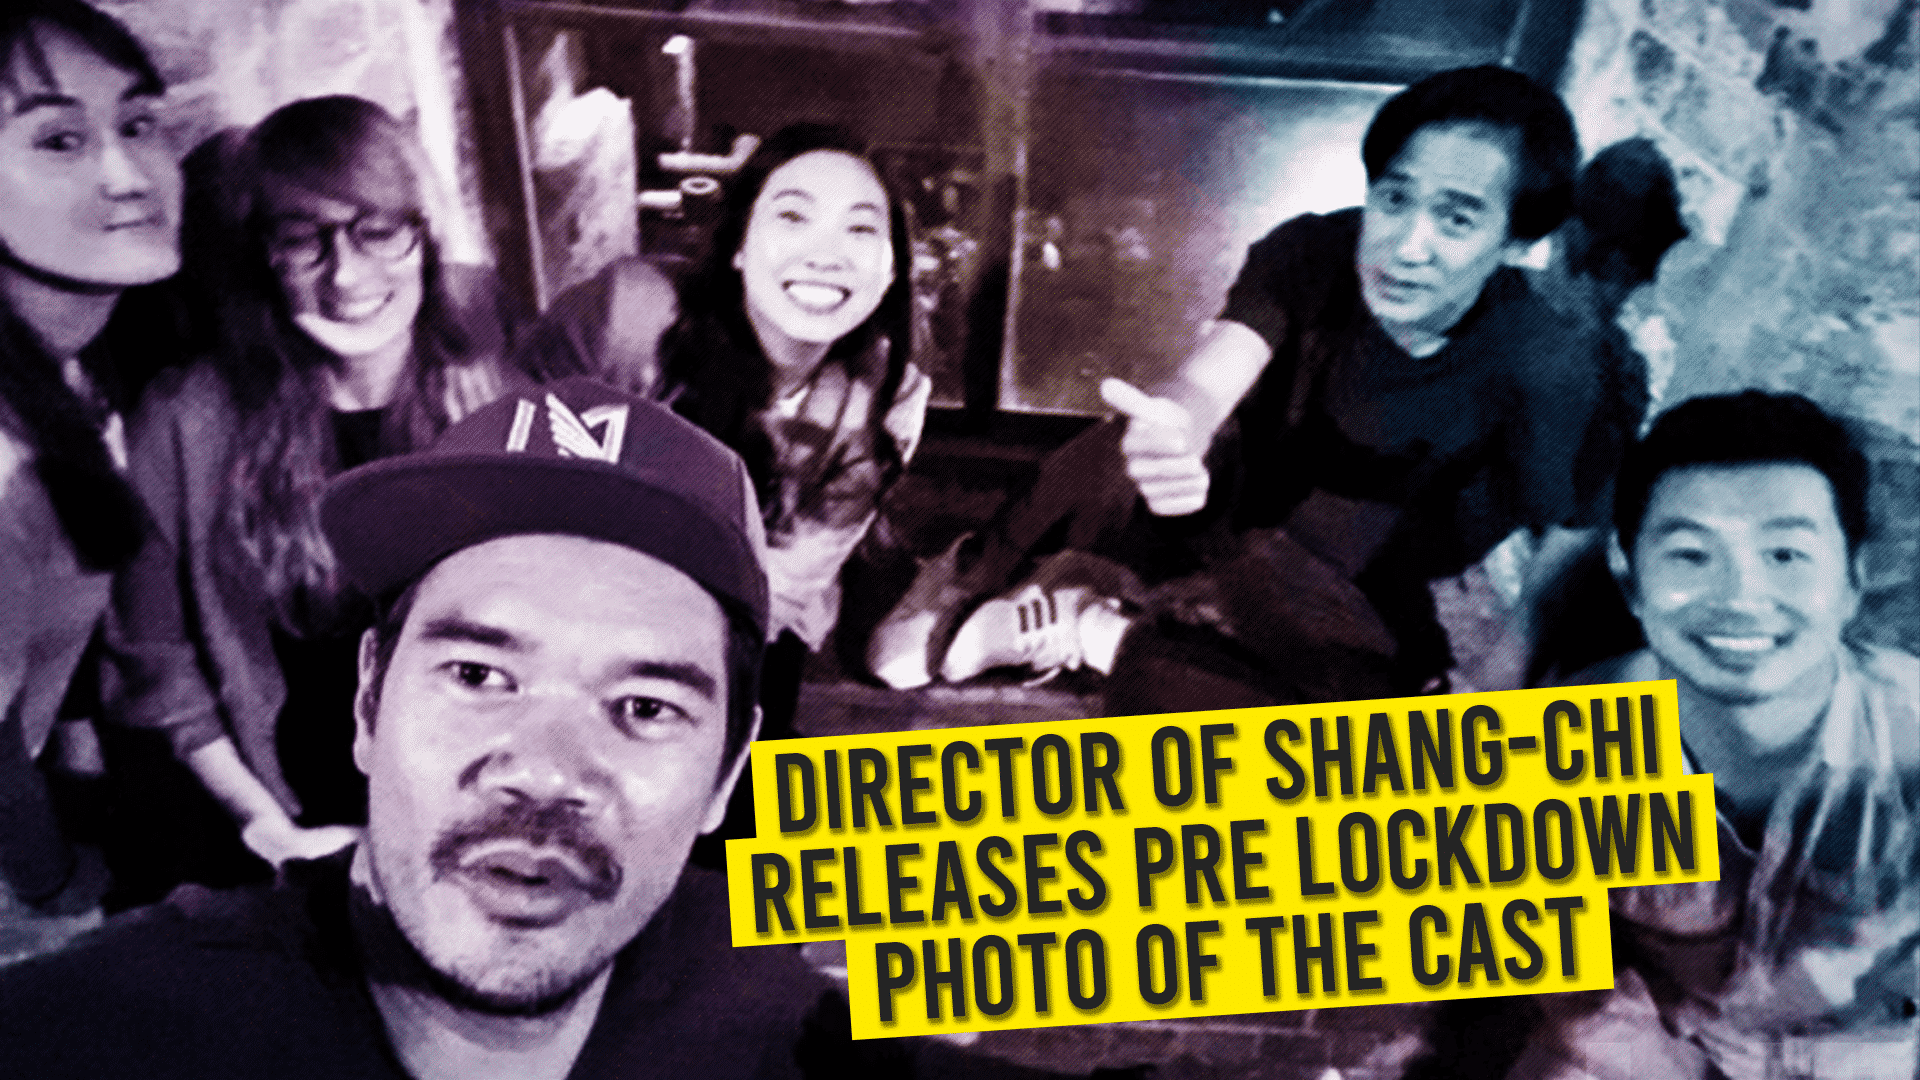 Director Of Shang-Chi Releases Pre Lockdown Photo Of The Cast.